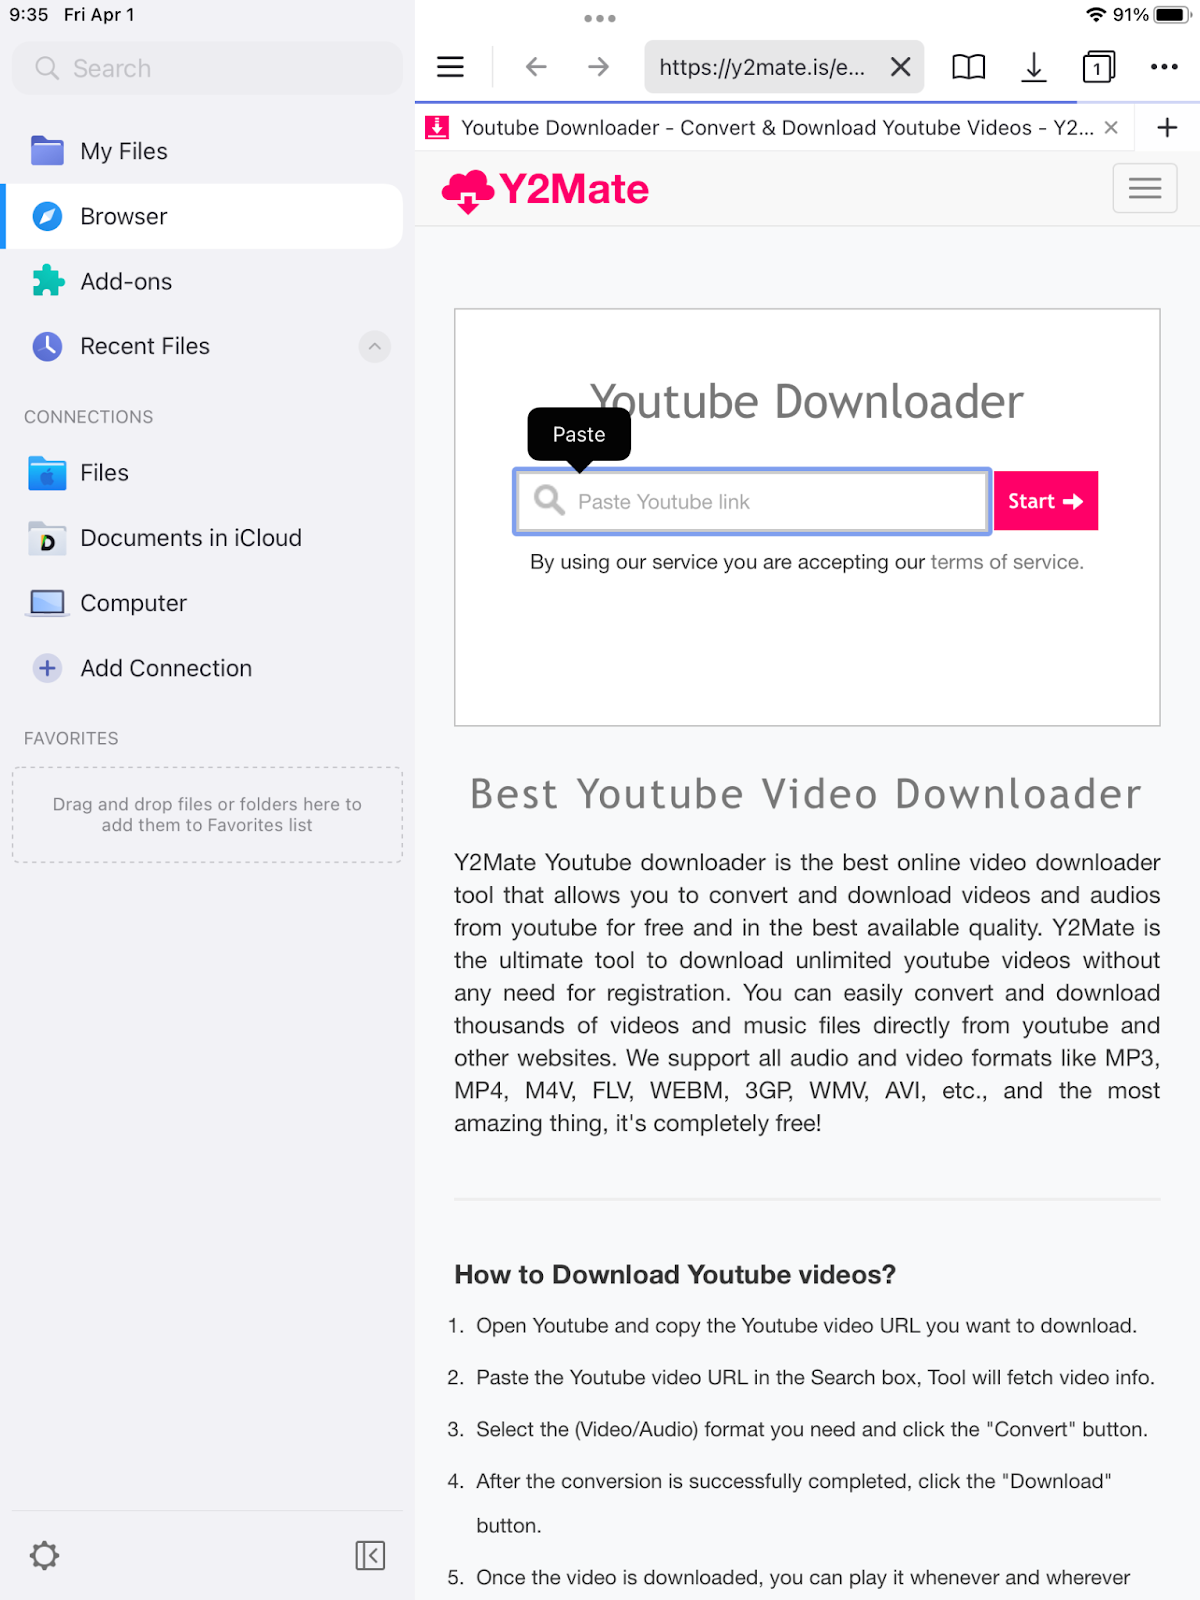 How To Download YouTube Videos and Save YouTube Videos To IPhone, IPad, Laptop & Android Phones